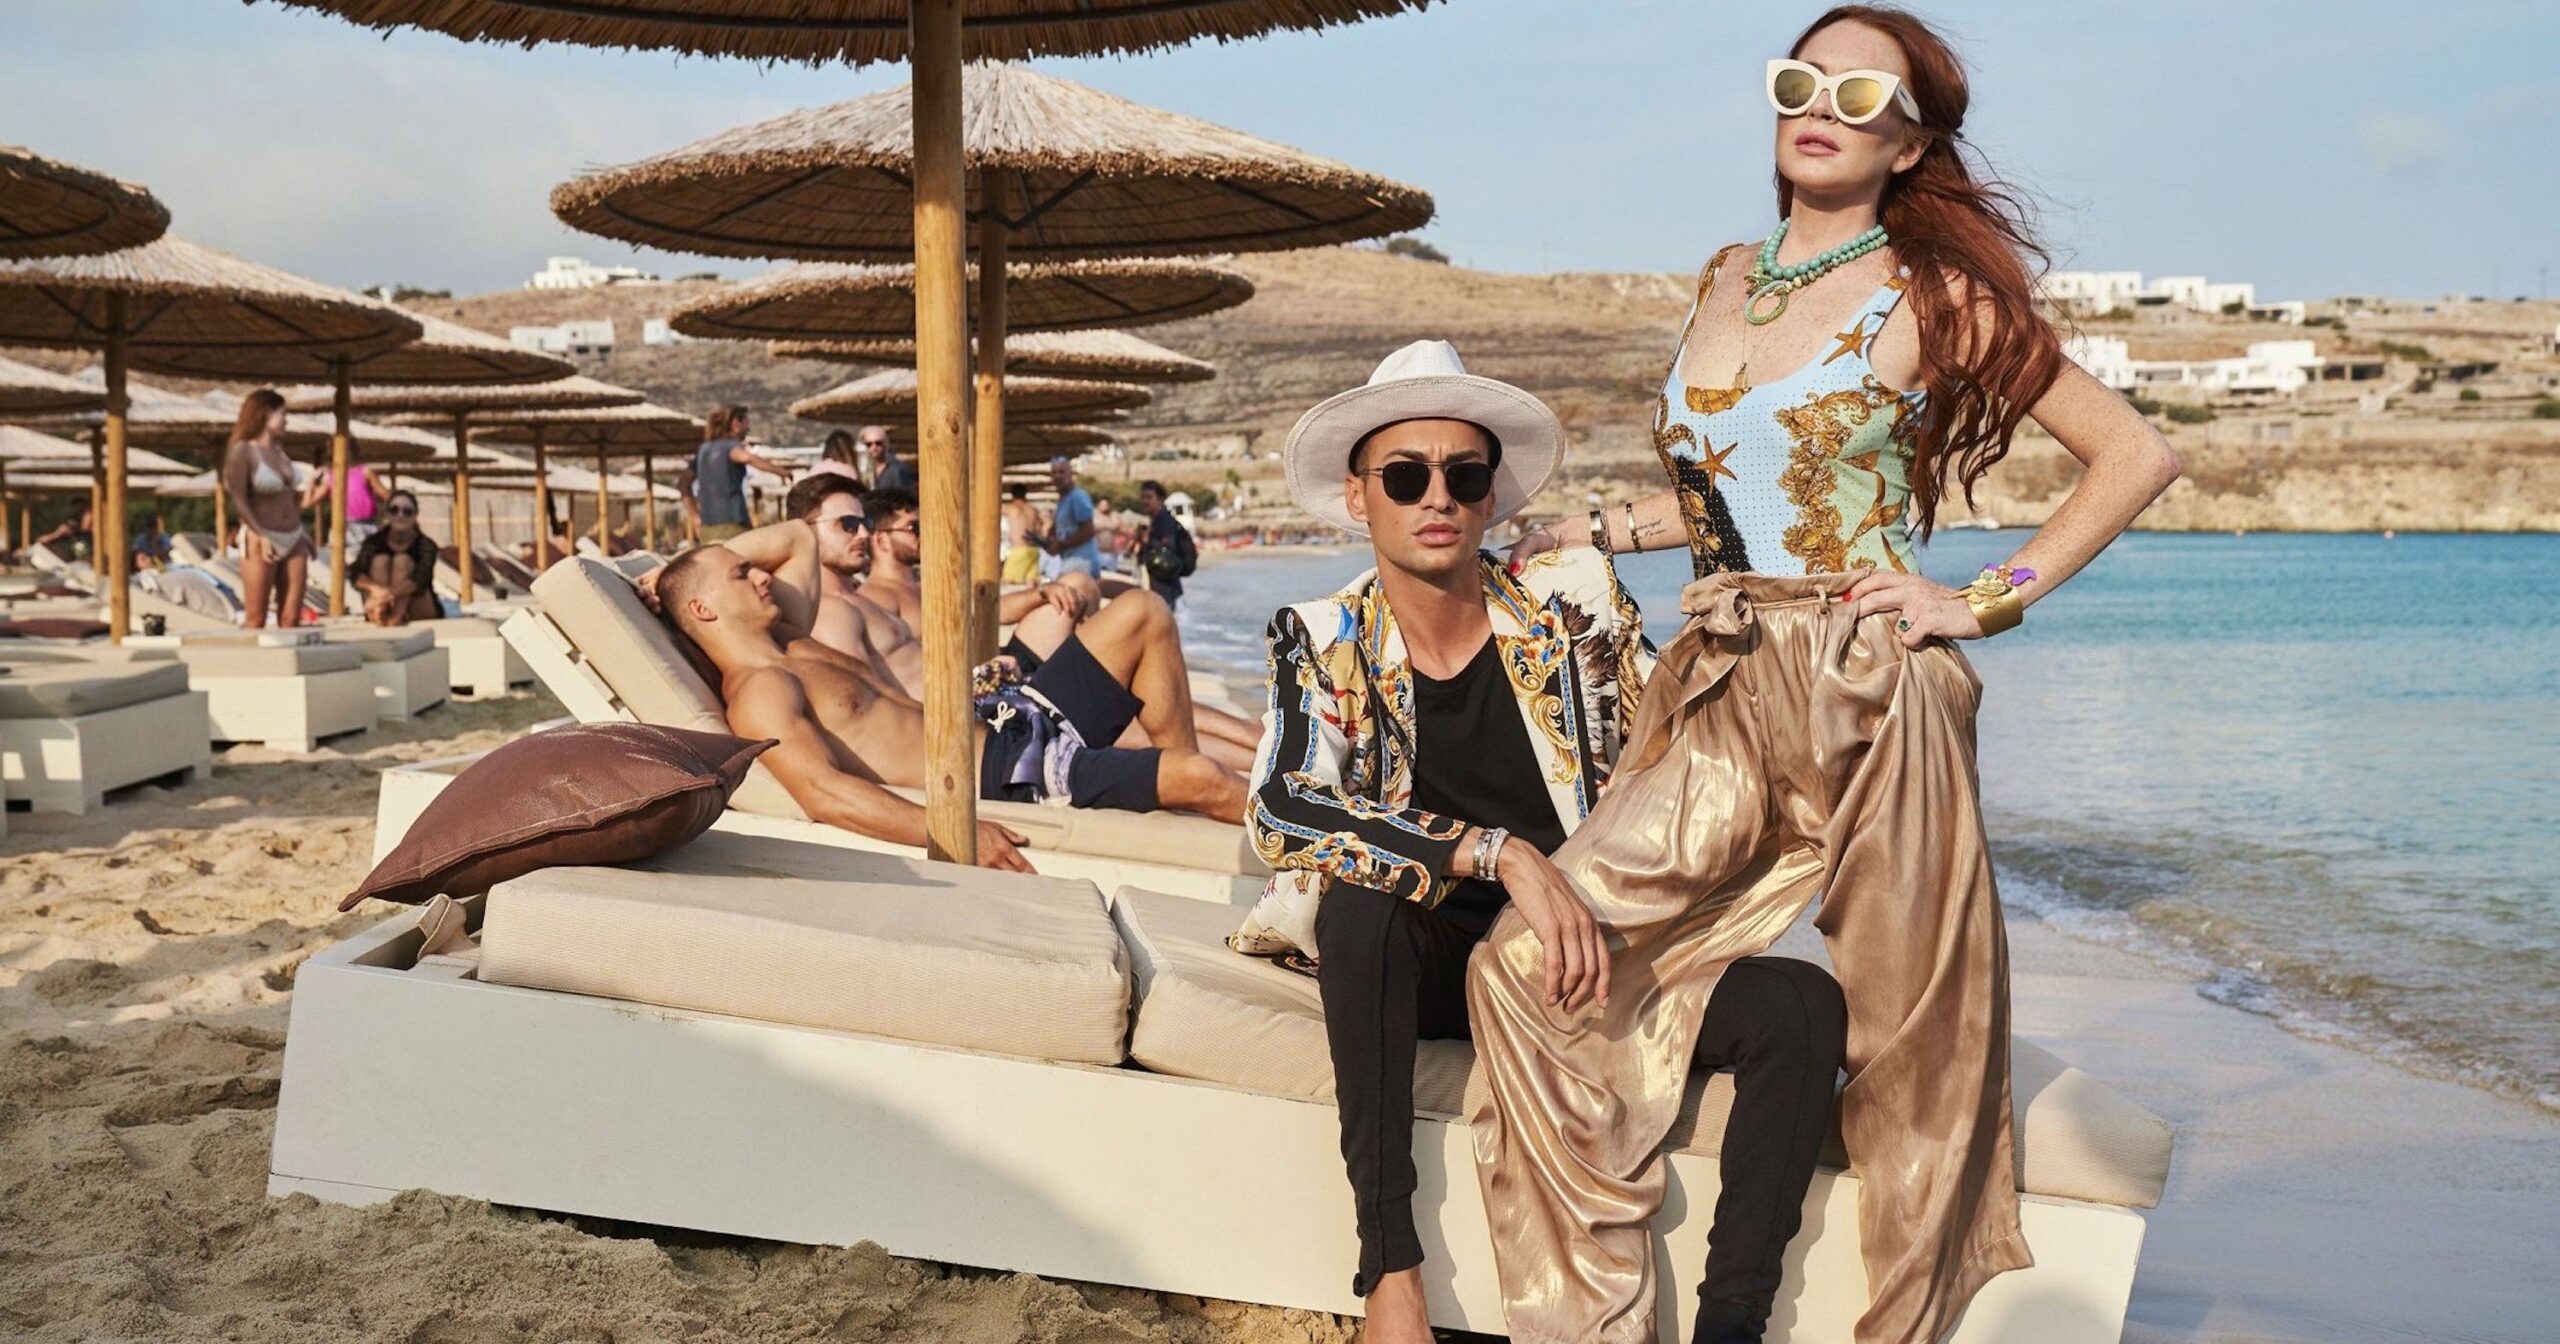 Lindsay Lohan Beach Club: A Haven of Entertainment and Luxury